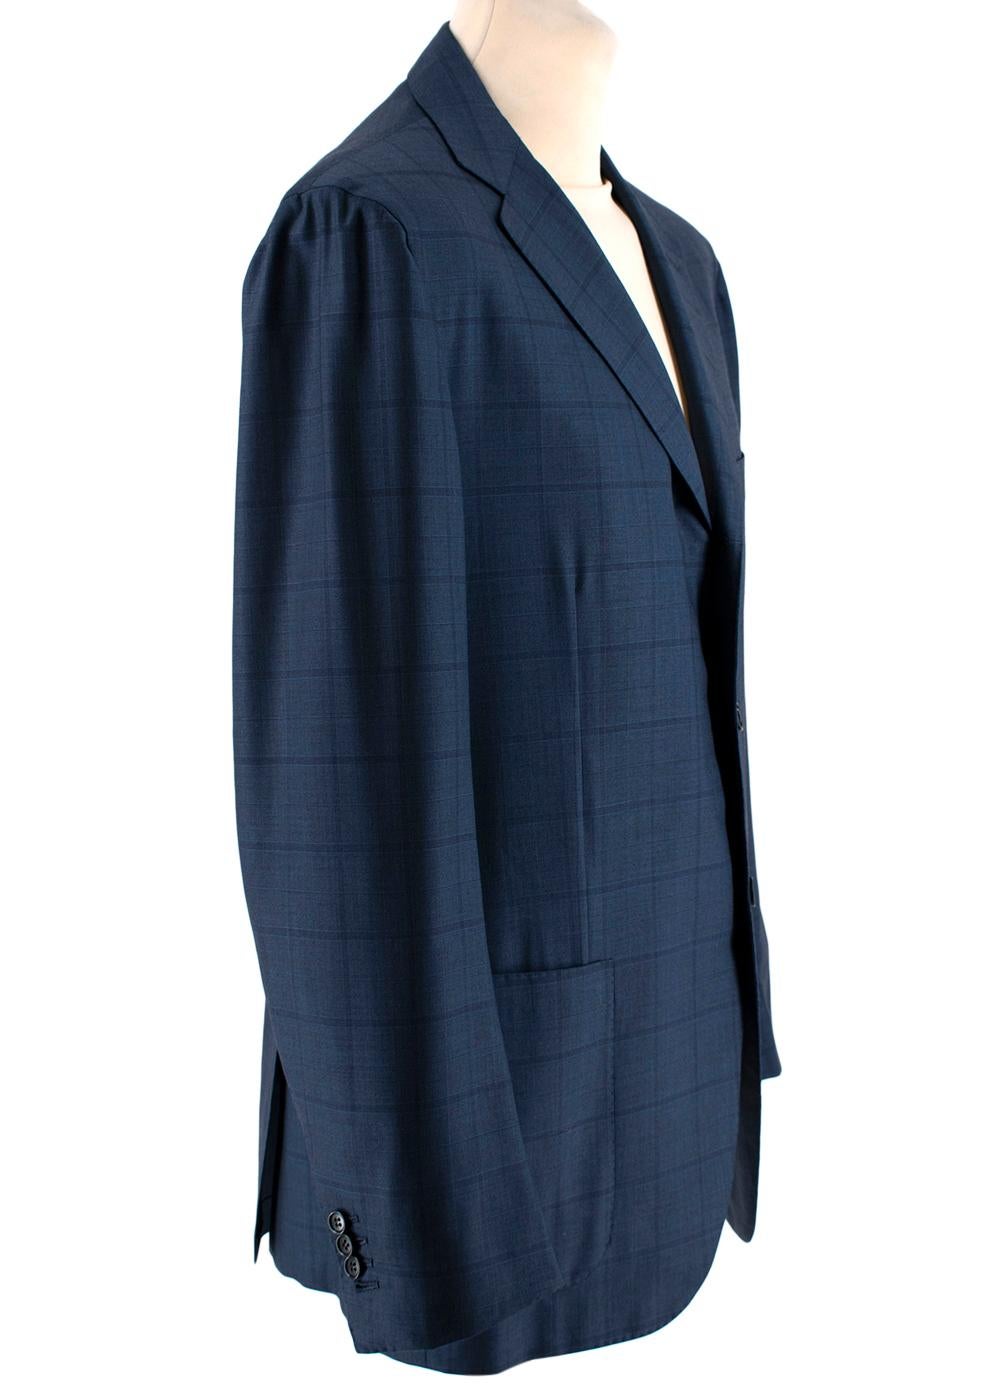 Kiton Napoli Blue Checkered Wool Single Breasted Suit

- Made of soft lightweight wool
- Gorgeous blue checkered pattern 
Jacket:
- Three exterior pockets
- Three interior pockets
- Single-breasted cut with three button enclosures
- Four buttons on